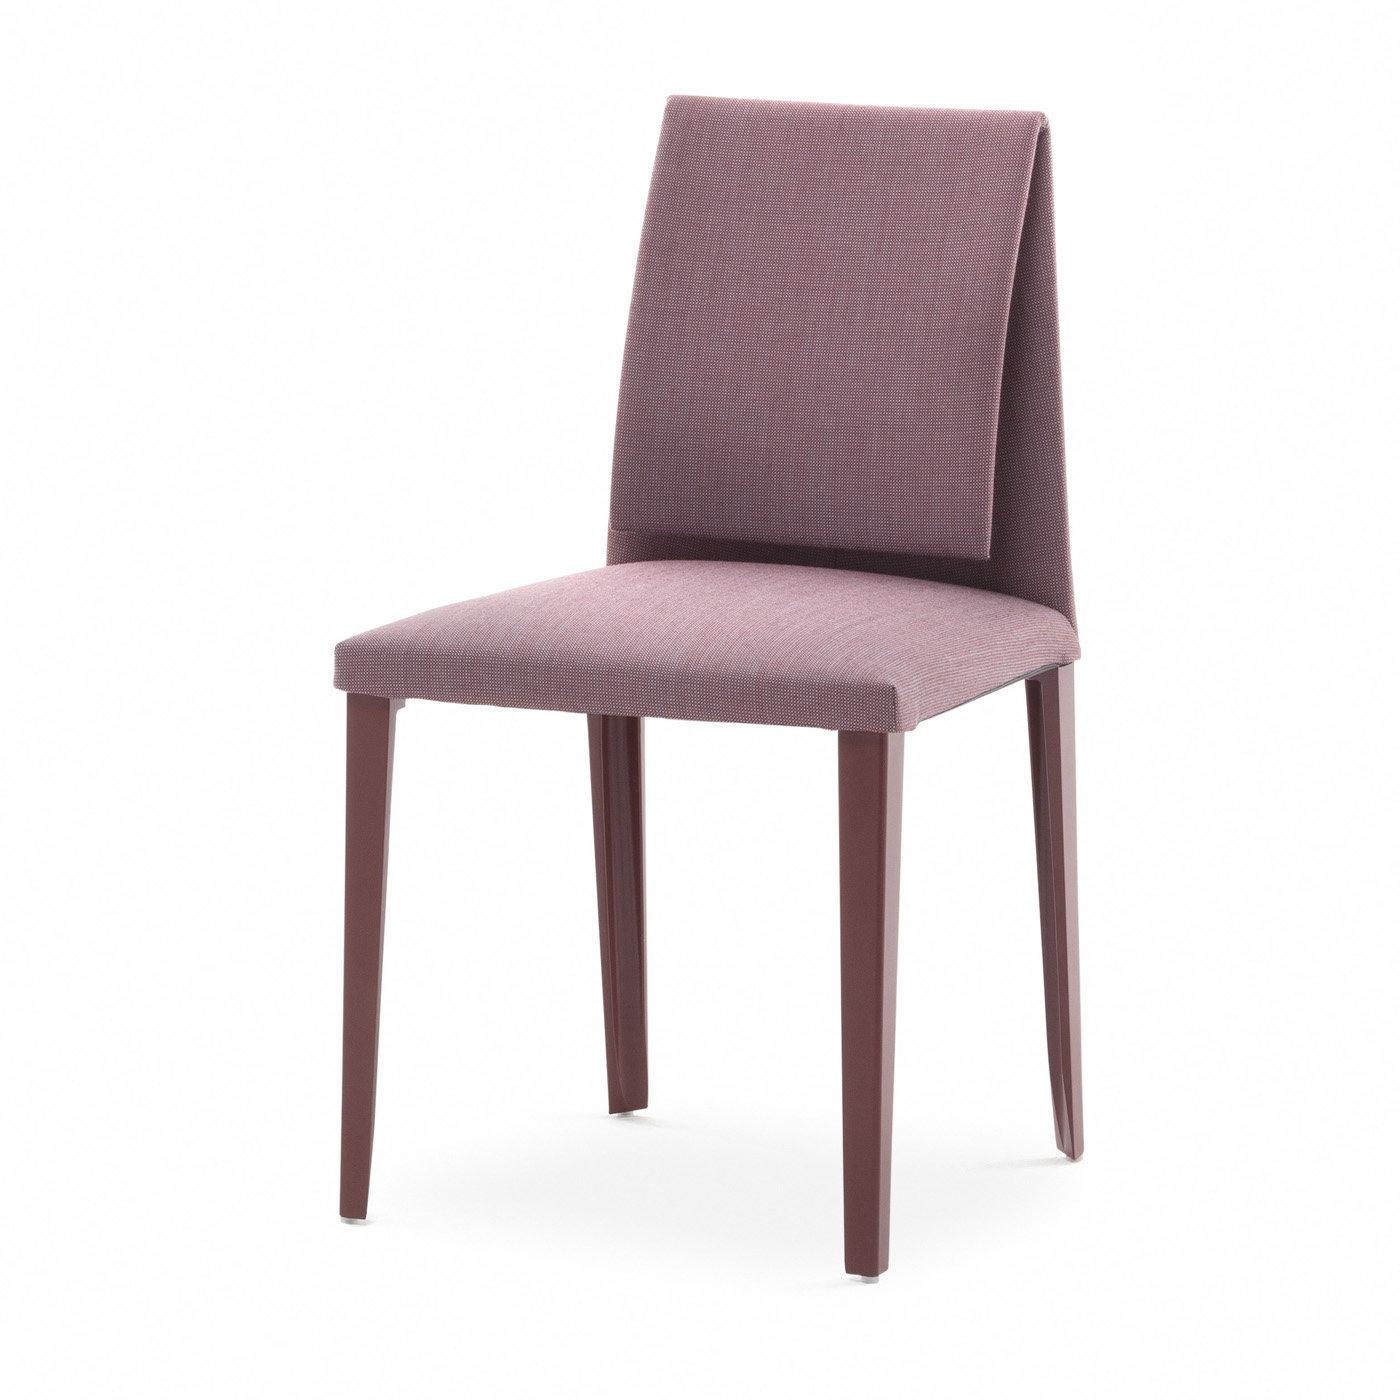 Designed by Luigi Baroli and suitable for a modern kitchen, dining room, or office, this elegant chair boasts a steel frame with flexible backrest and armrests padded with CFC-free polyurethane foam. The attractive lilac-pink shade of the die-cast